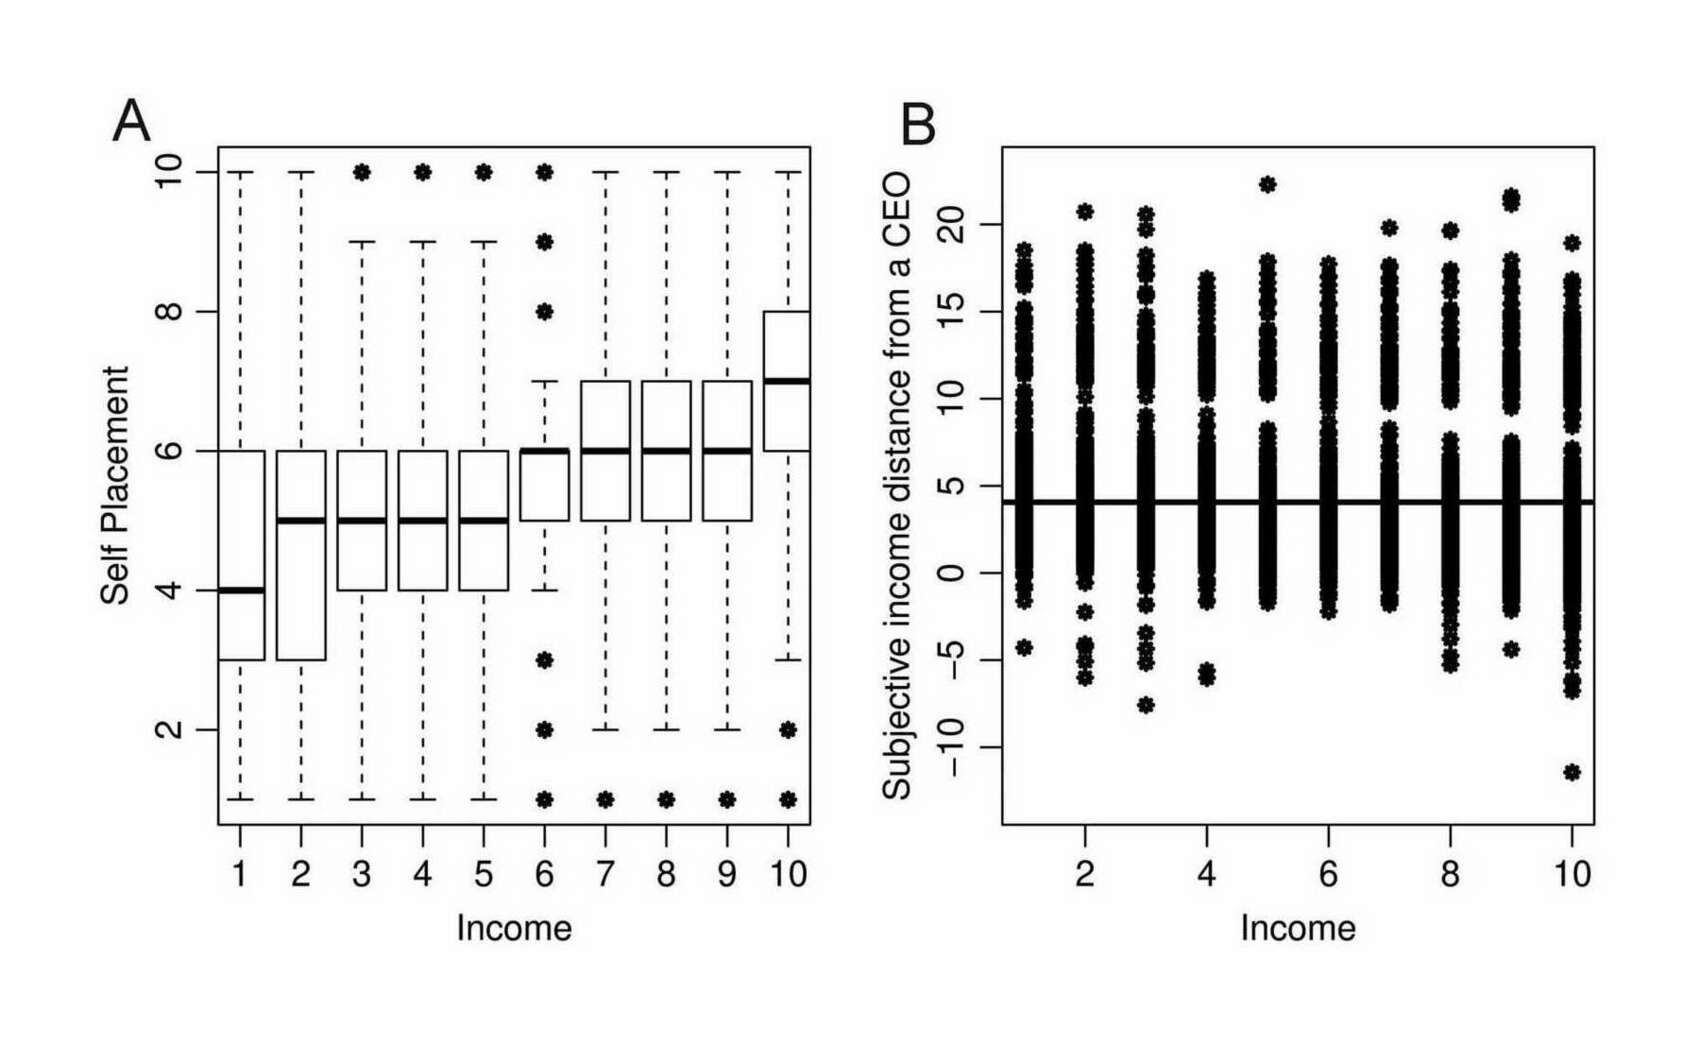 Figure 2: Self-Placement (A) and Income Distance to a CEO (B) by income decile. The black line shows the logarithmic transformation of highest average CEO-employee compensation ratio in the sample (the USA).